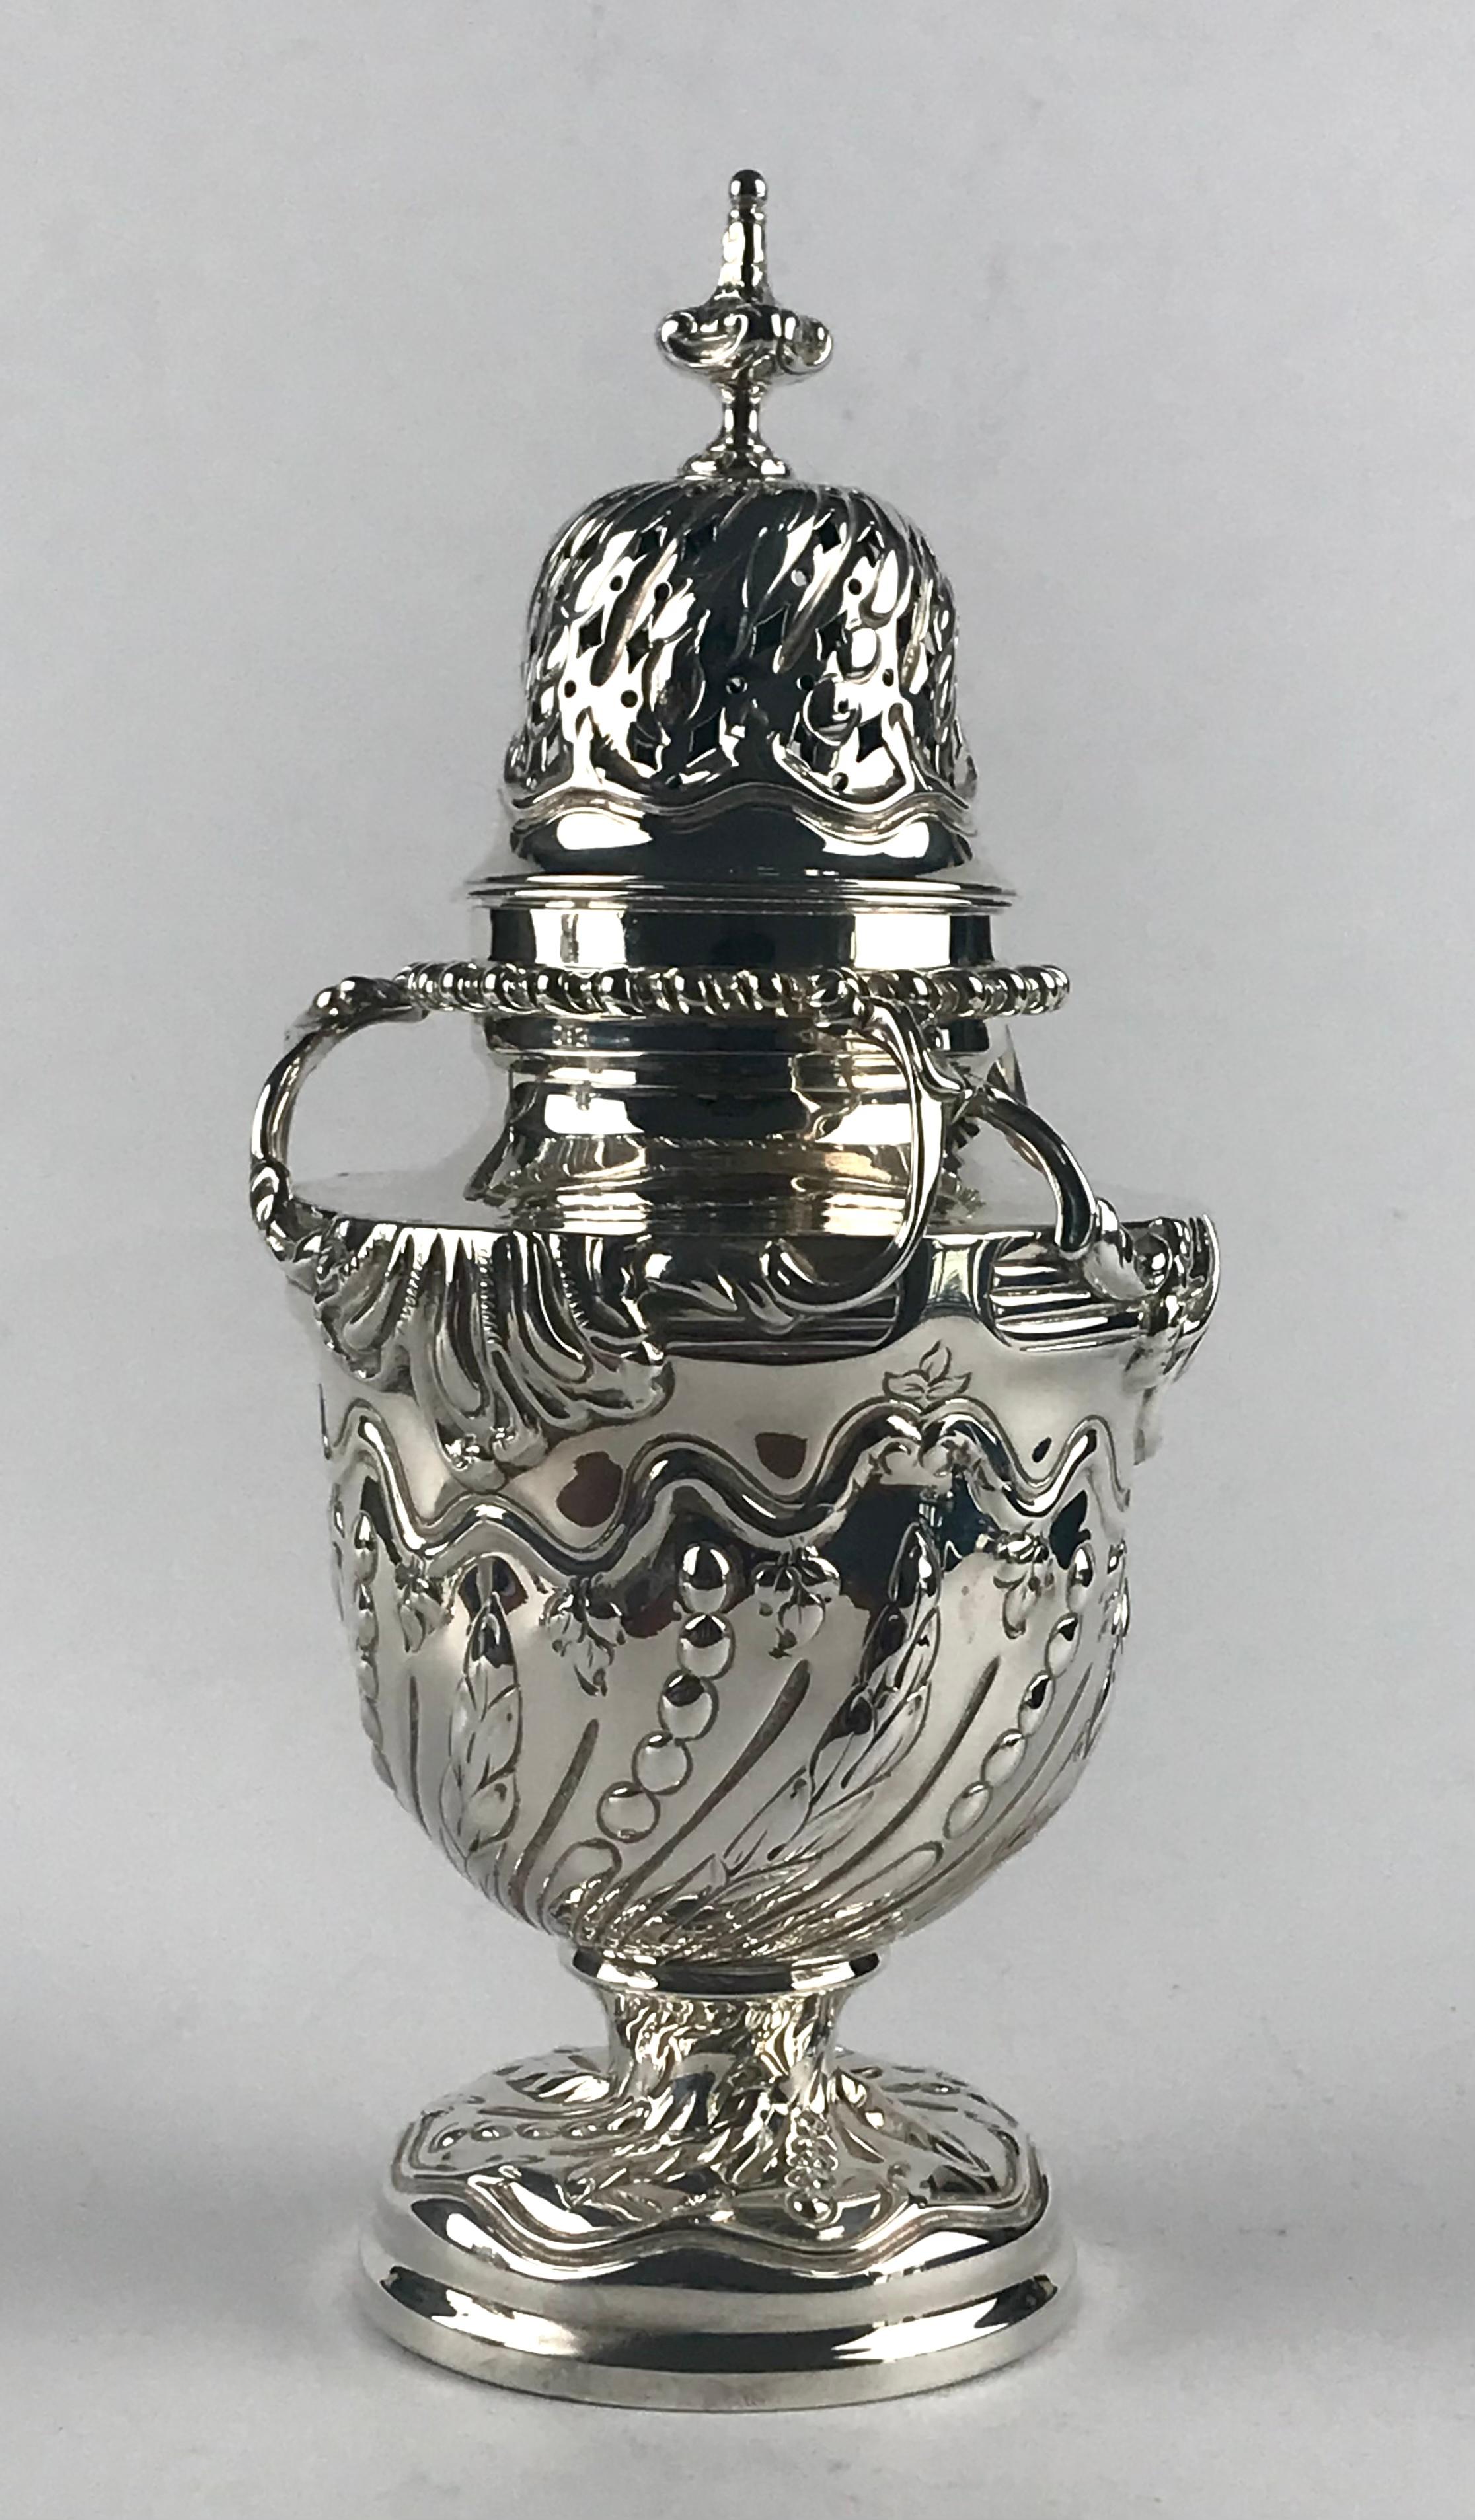 A magnificent Victorian solid silver sterling heavy pair sugar casters shakers

Silversmith William Comyns
Hallmarked for London 1894

Weight 910g 
Measure: Height 22cm

In excellent condition 

All 4 pieces are hallmarked.
  